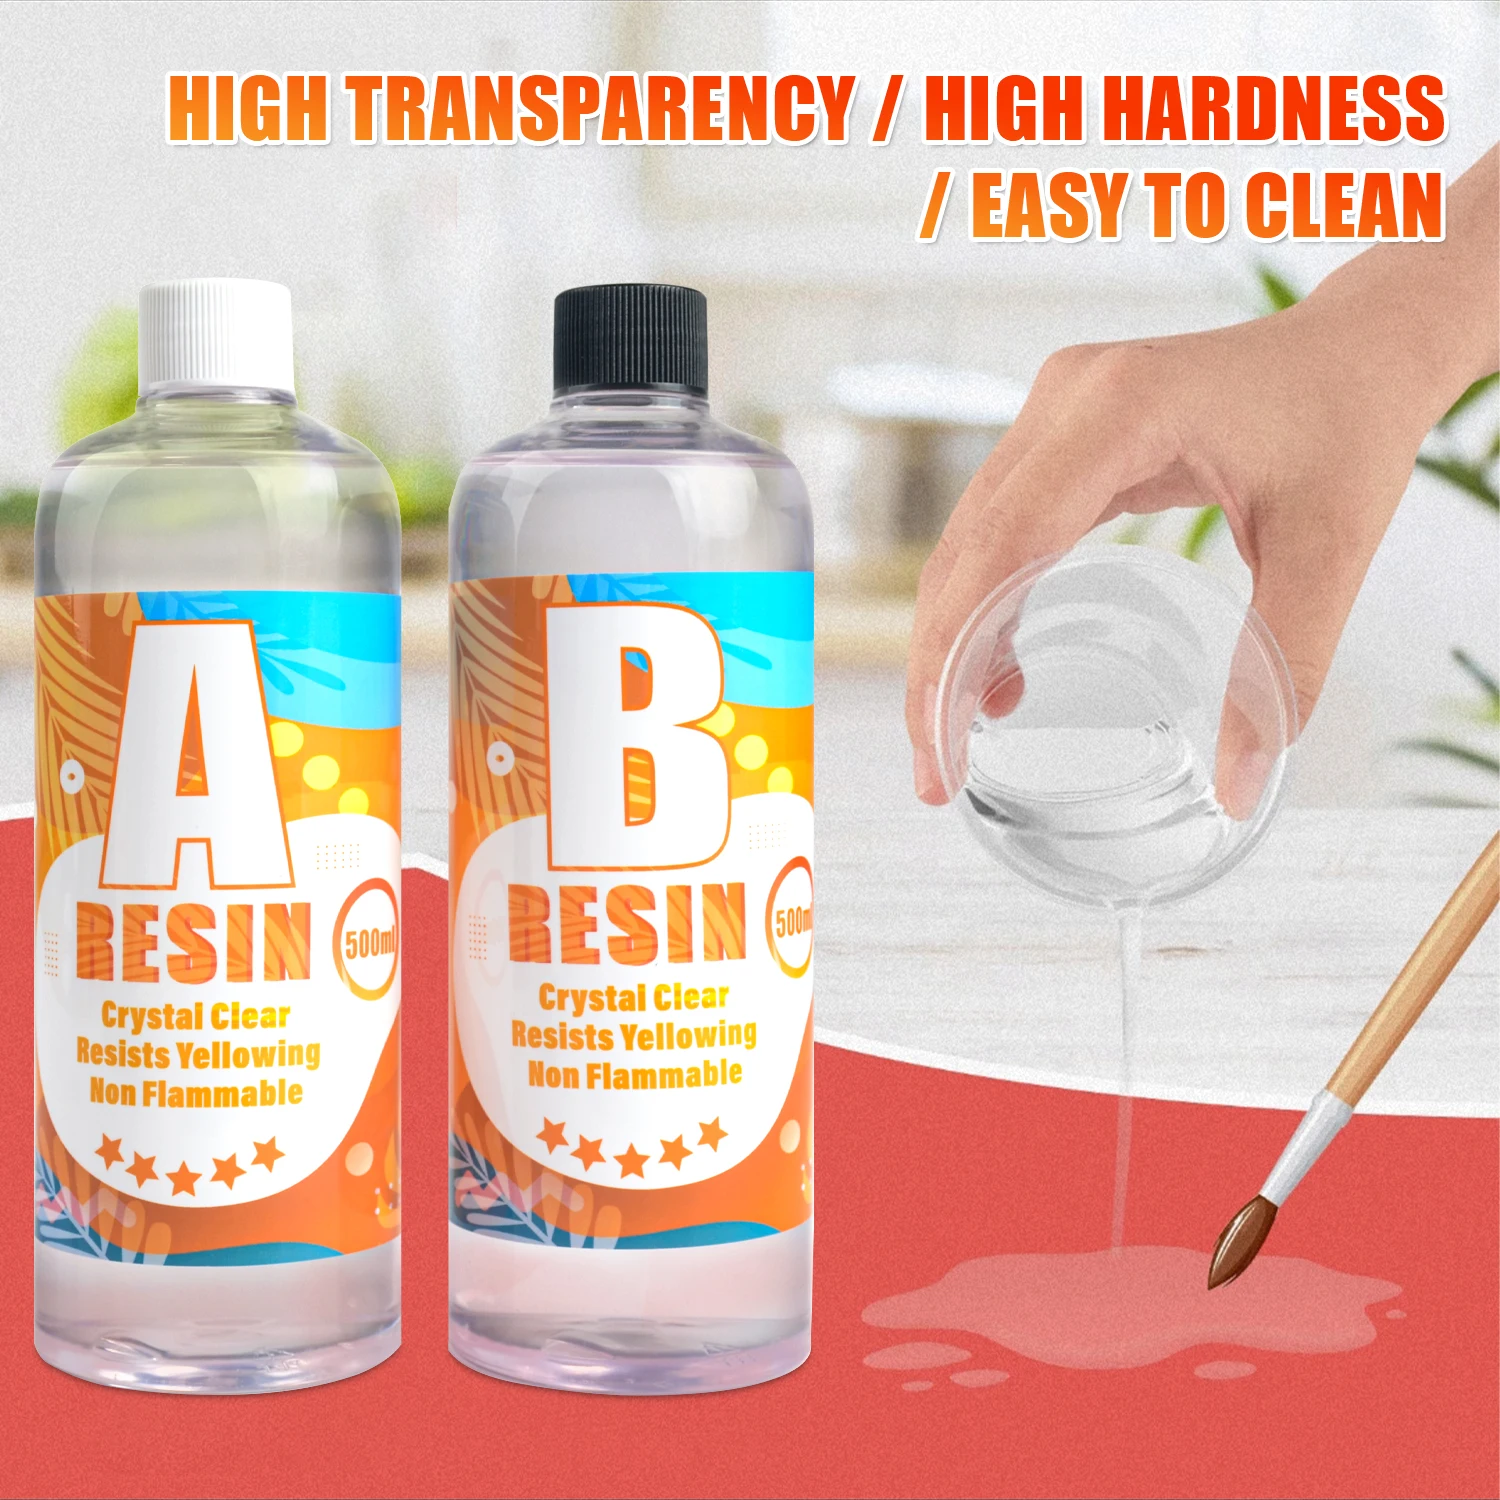 1:1 AB Epoxy Resin Crystal Glue High Adhesive Clear Casting and Coating Resin for Jewelry Making Keychain DIY Crafts Resin Art